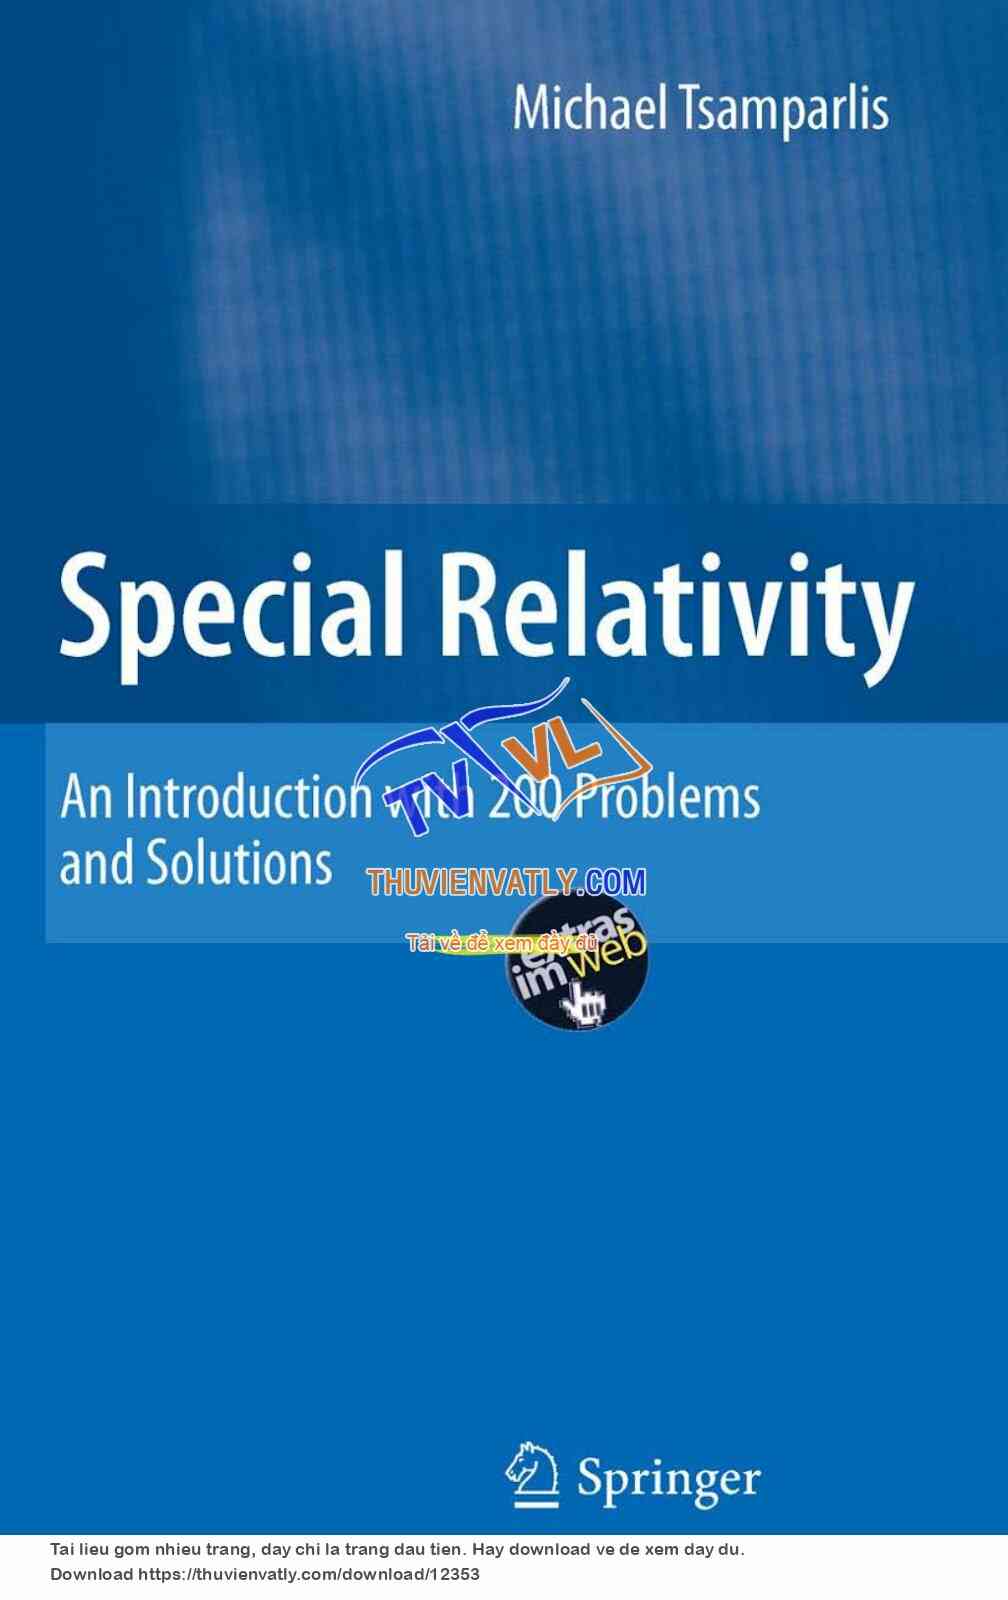 Special_Relativity_An_Introduction_w_200_Problems_and_Solutions